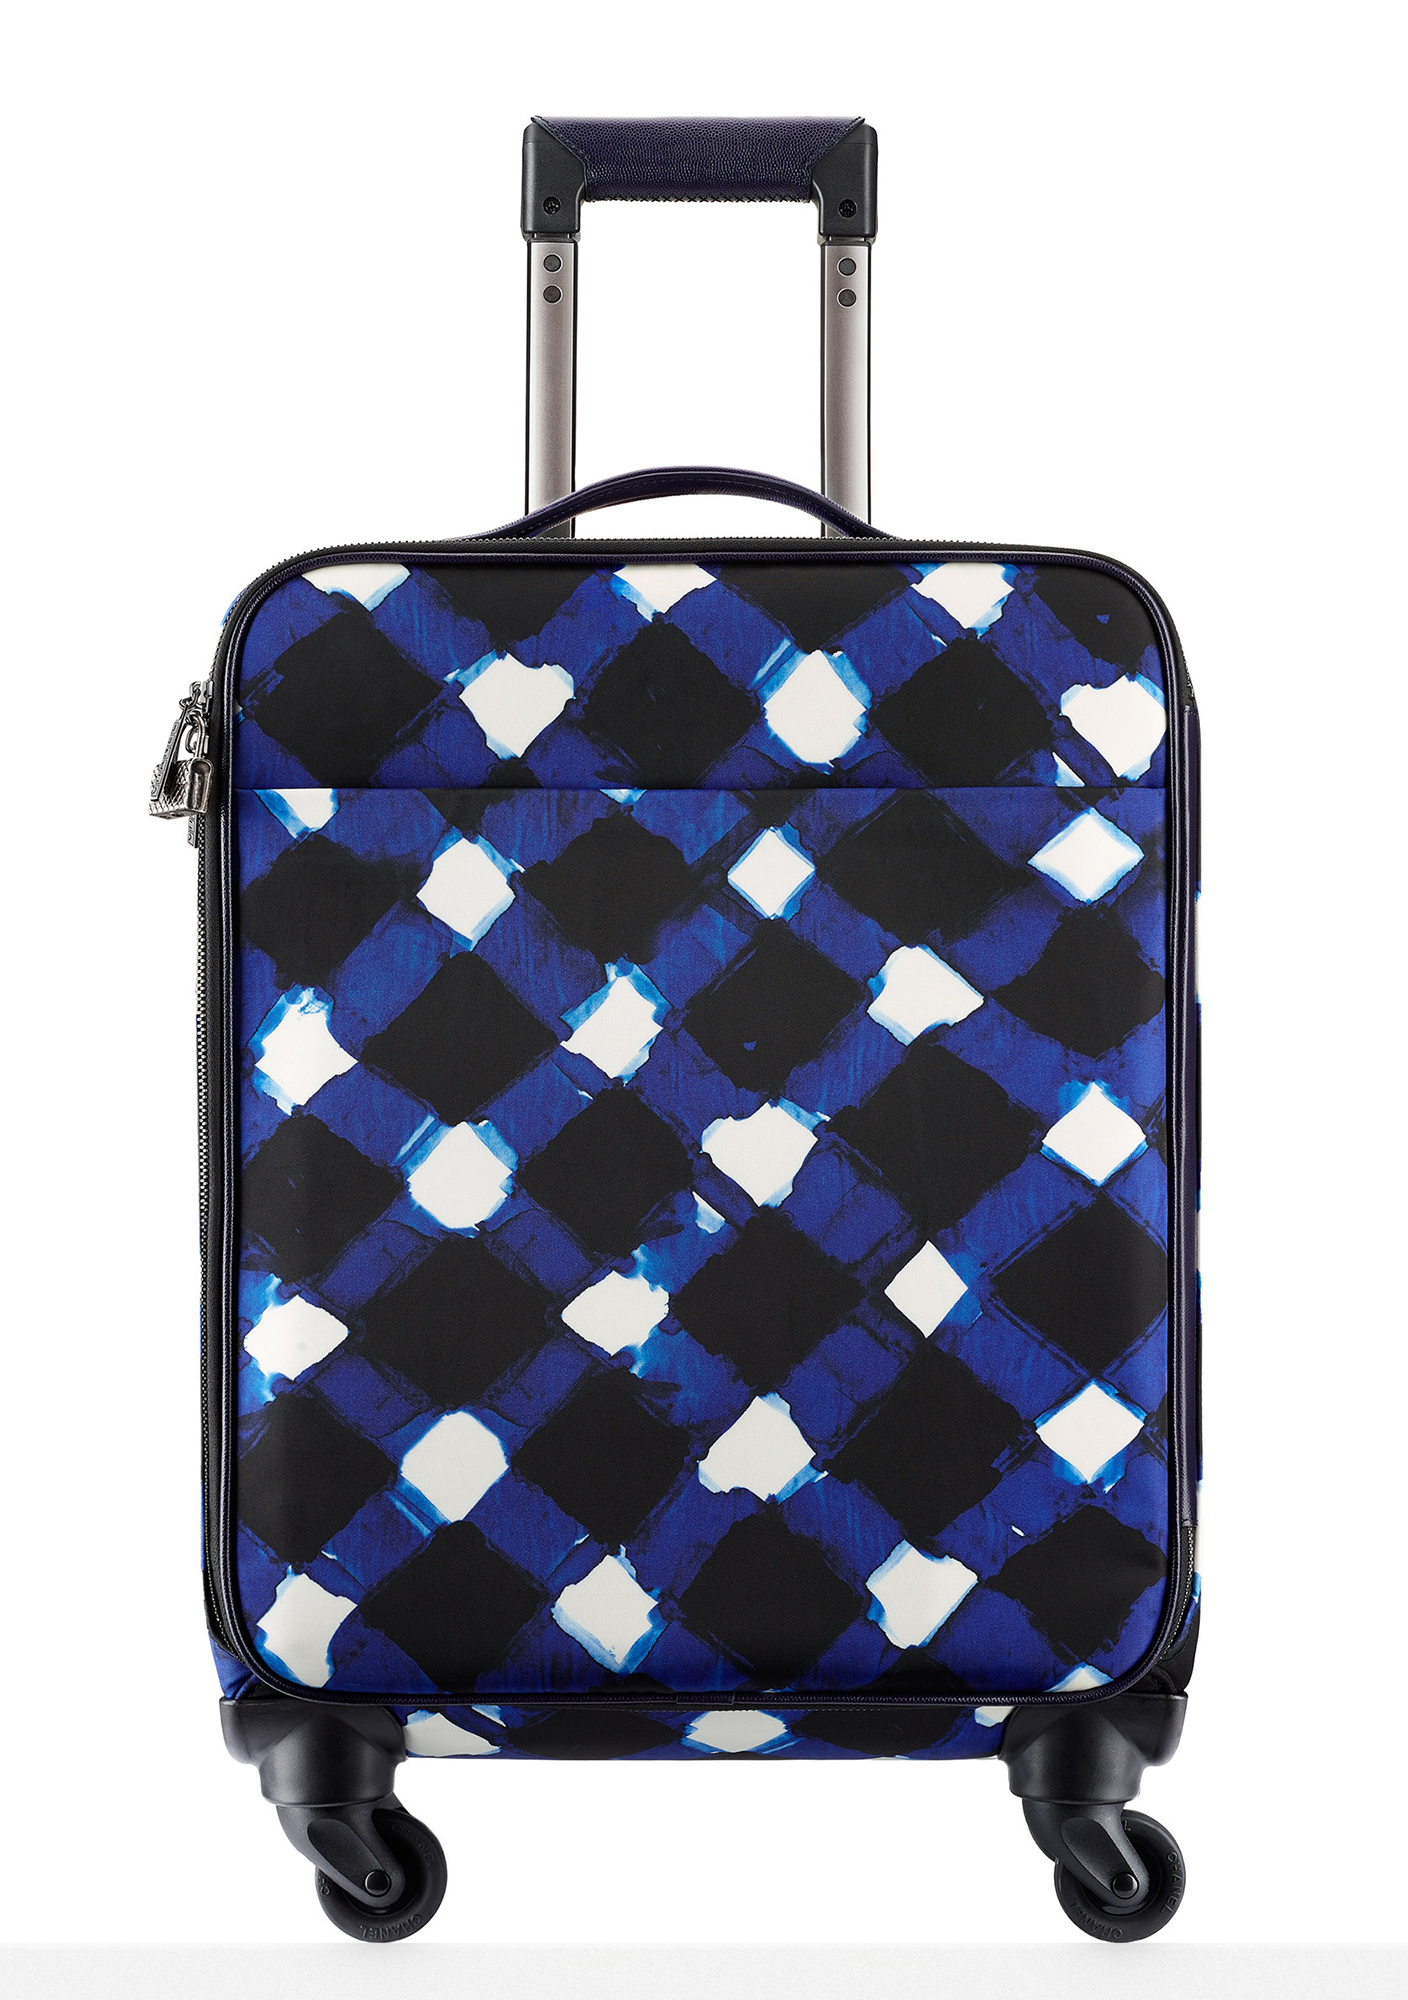 Chanel-Trolley-Rolling-Suitcase-4900